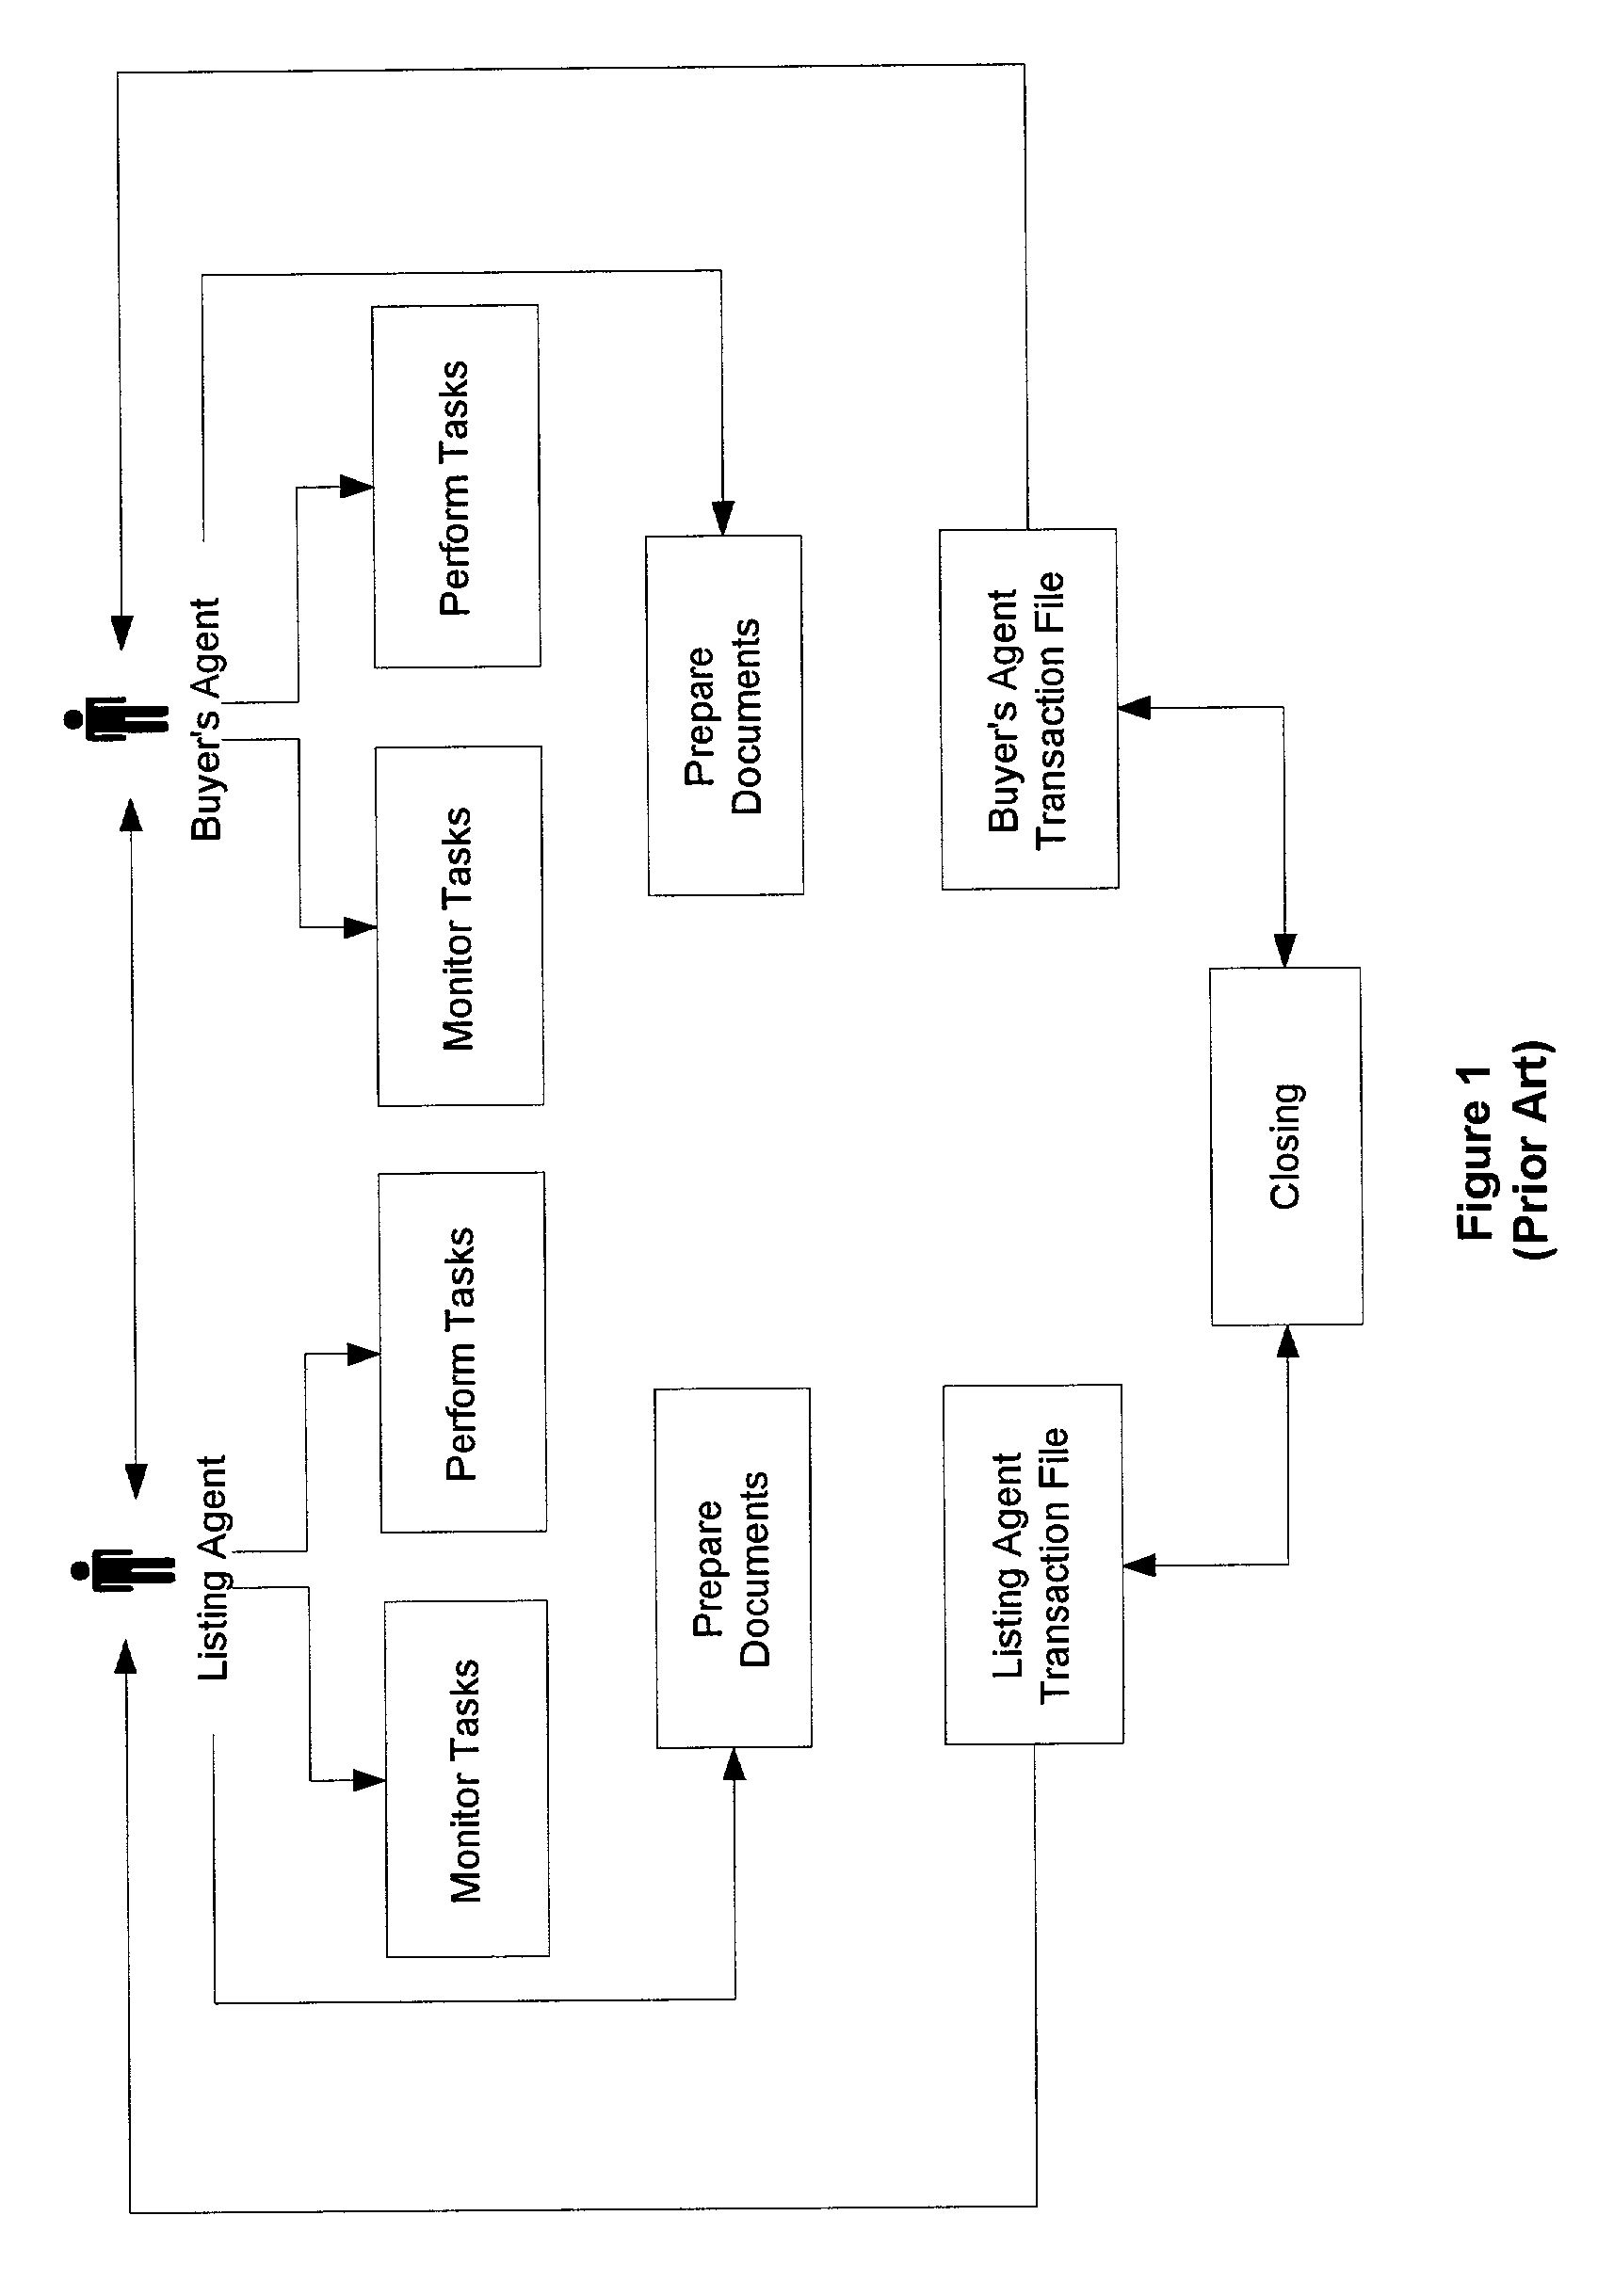 Method and system for managing and closing a real estate transaction